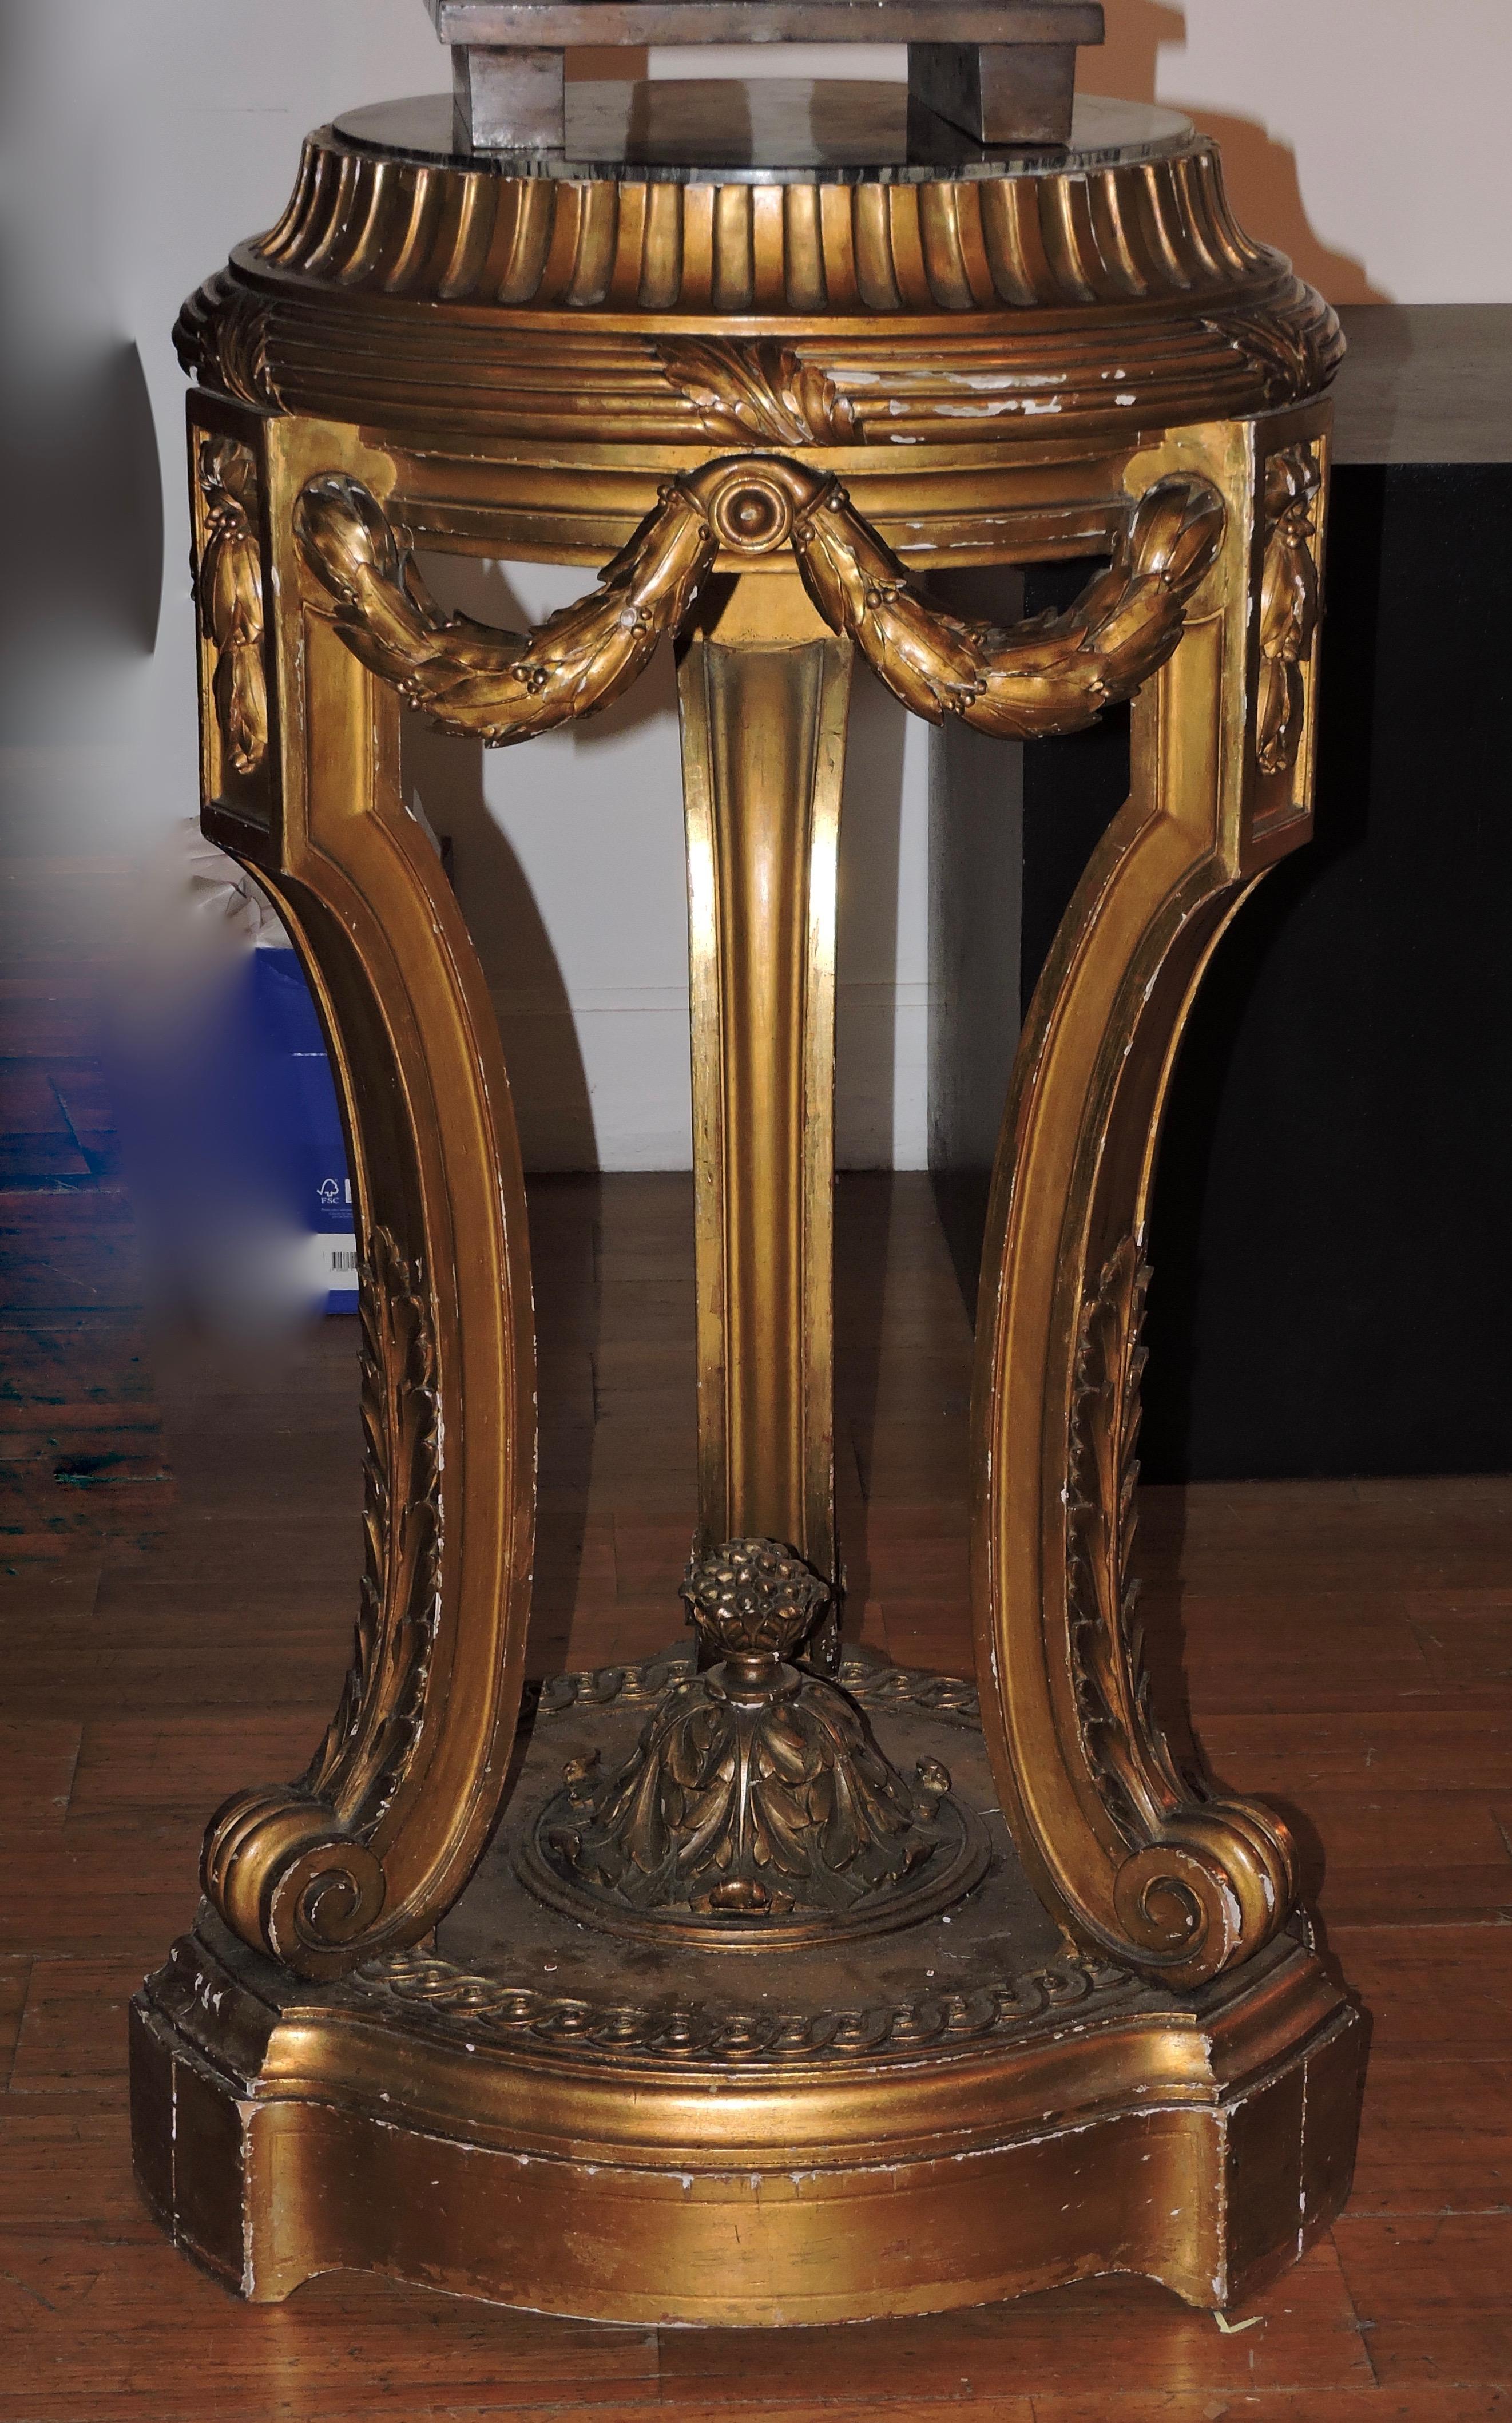 A French 19th century Louis XVI marble and giltwood Sellette and tripod guéridon.
In carved giltwood designed with band of laurels, tracery, grooves and acanthus leaves.
Grey veined marble-top,
circa 1880.